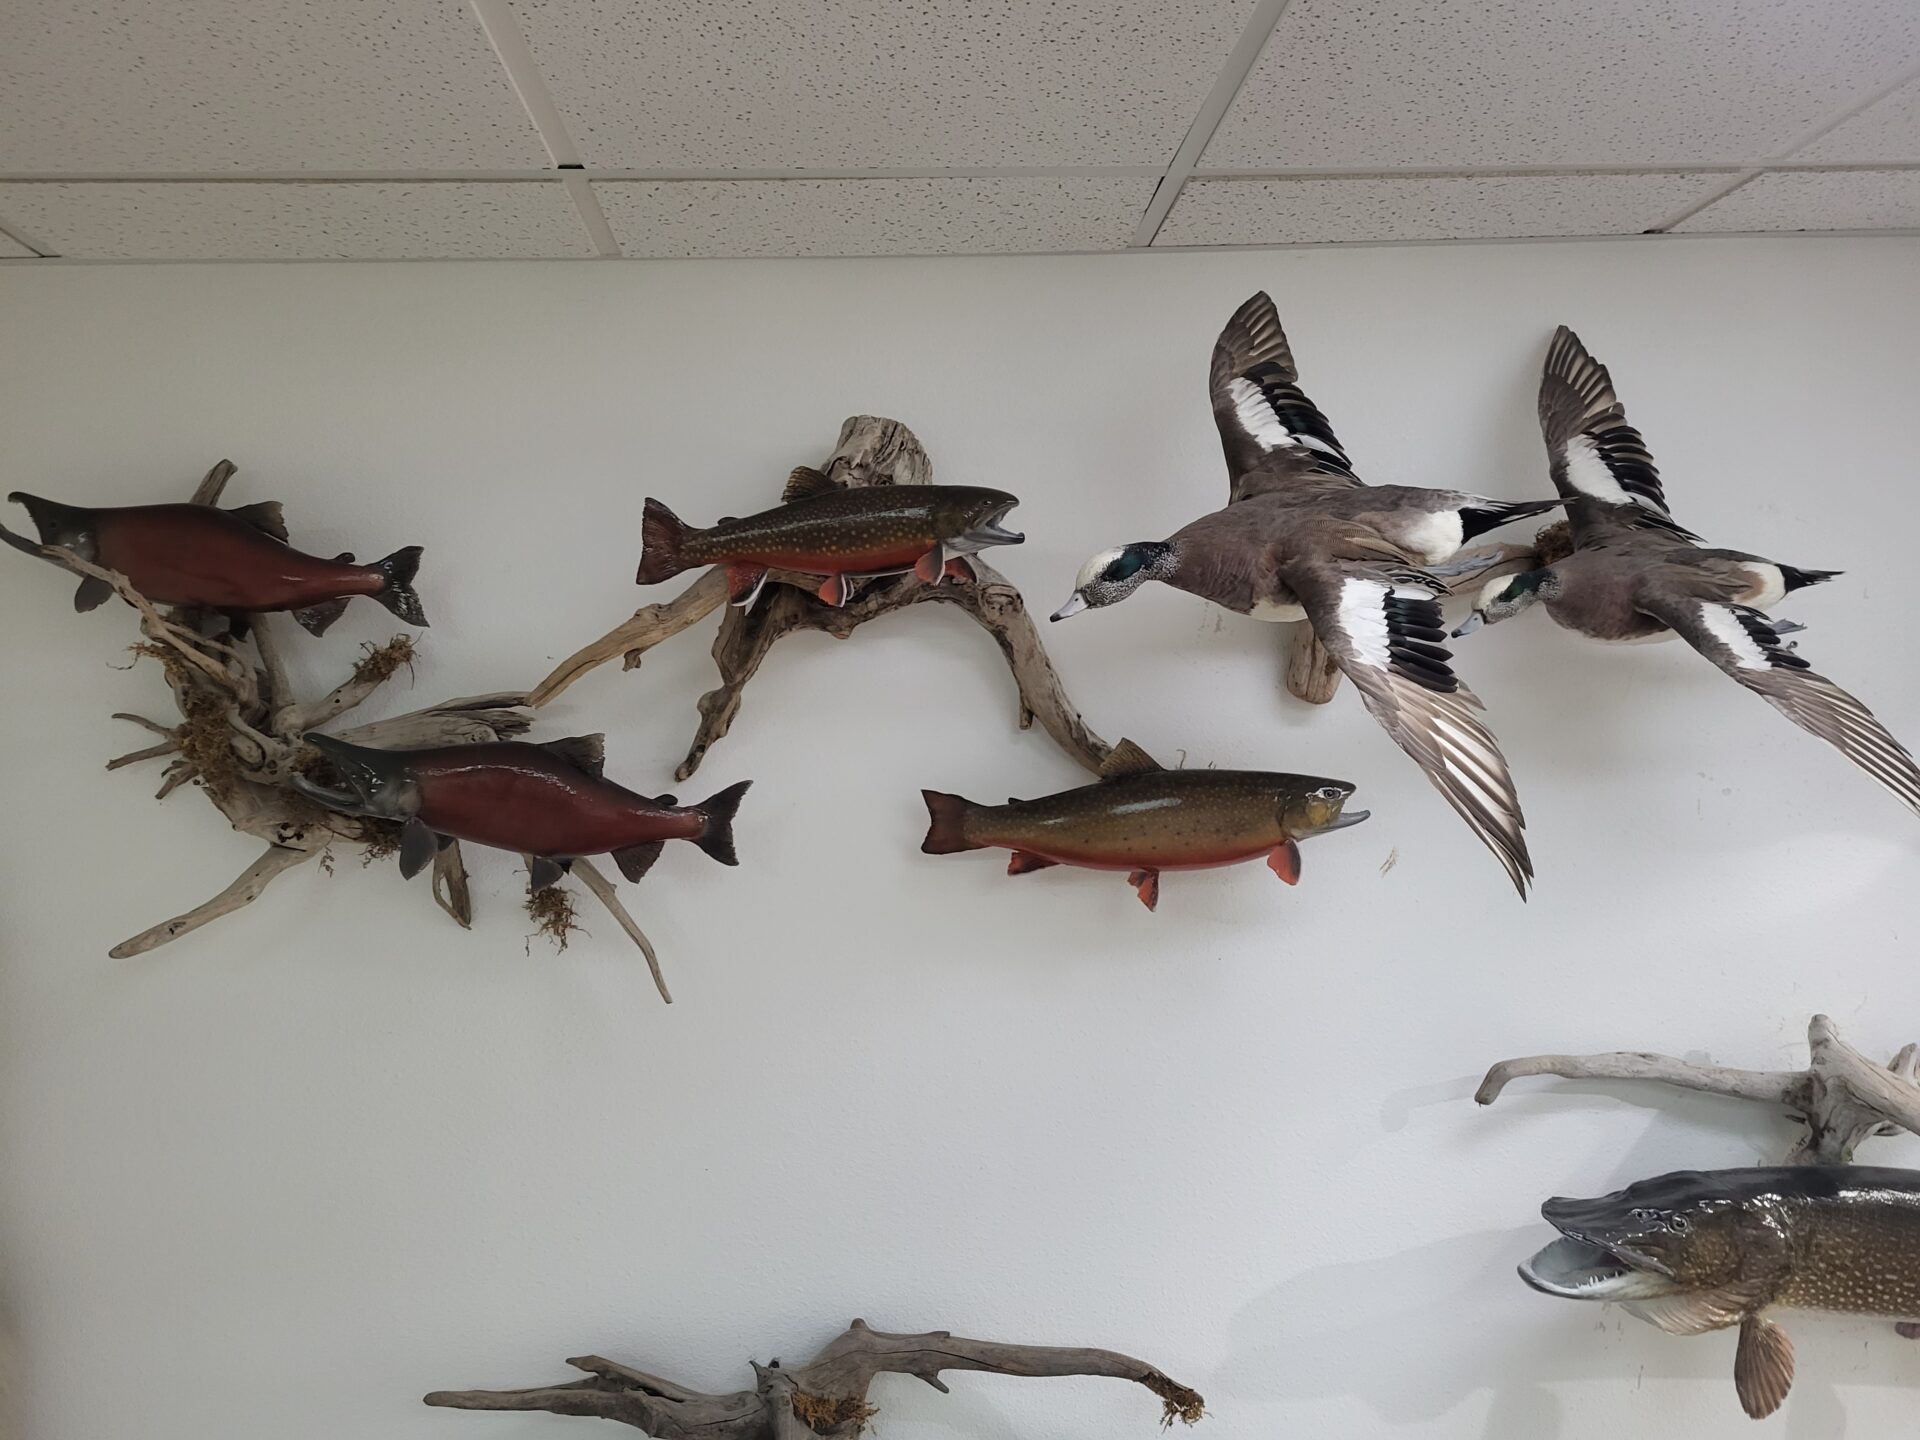 Fish taxidermy adorns the gallery along with bird taxidermy